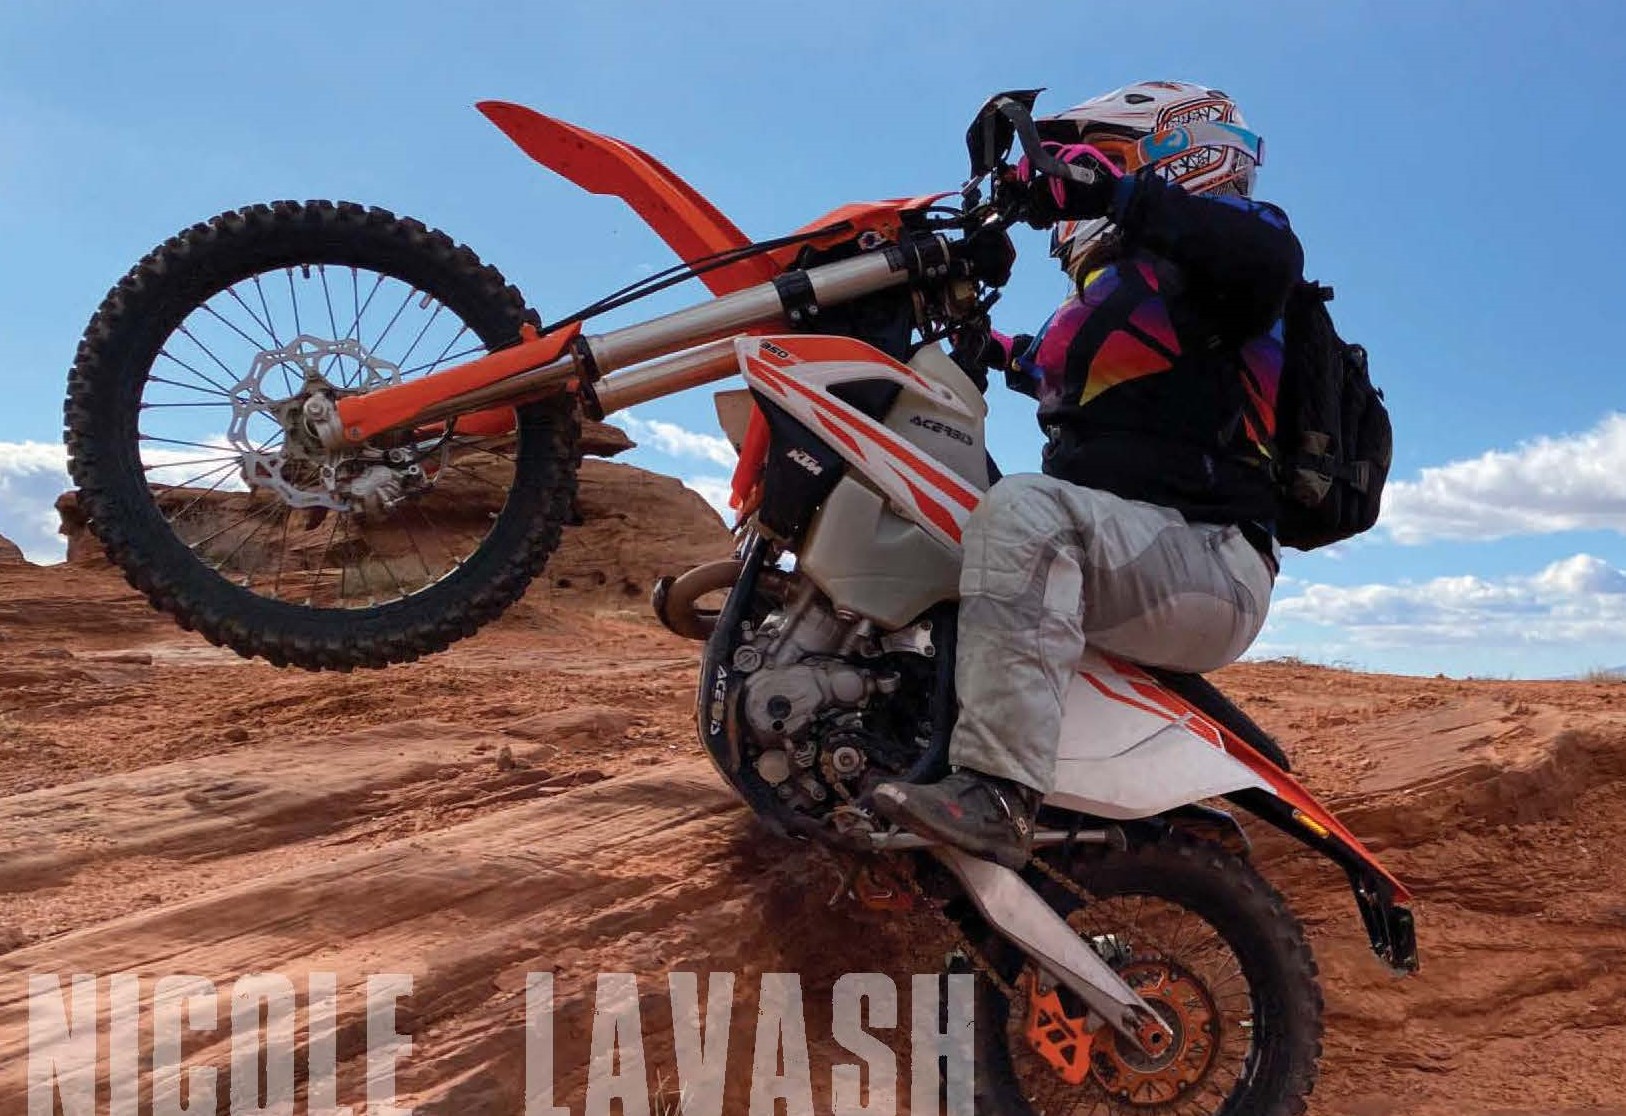 A side view of Nicole Lavash on her MX bike